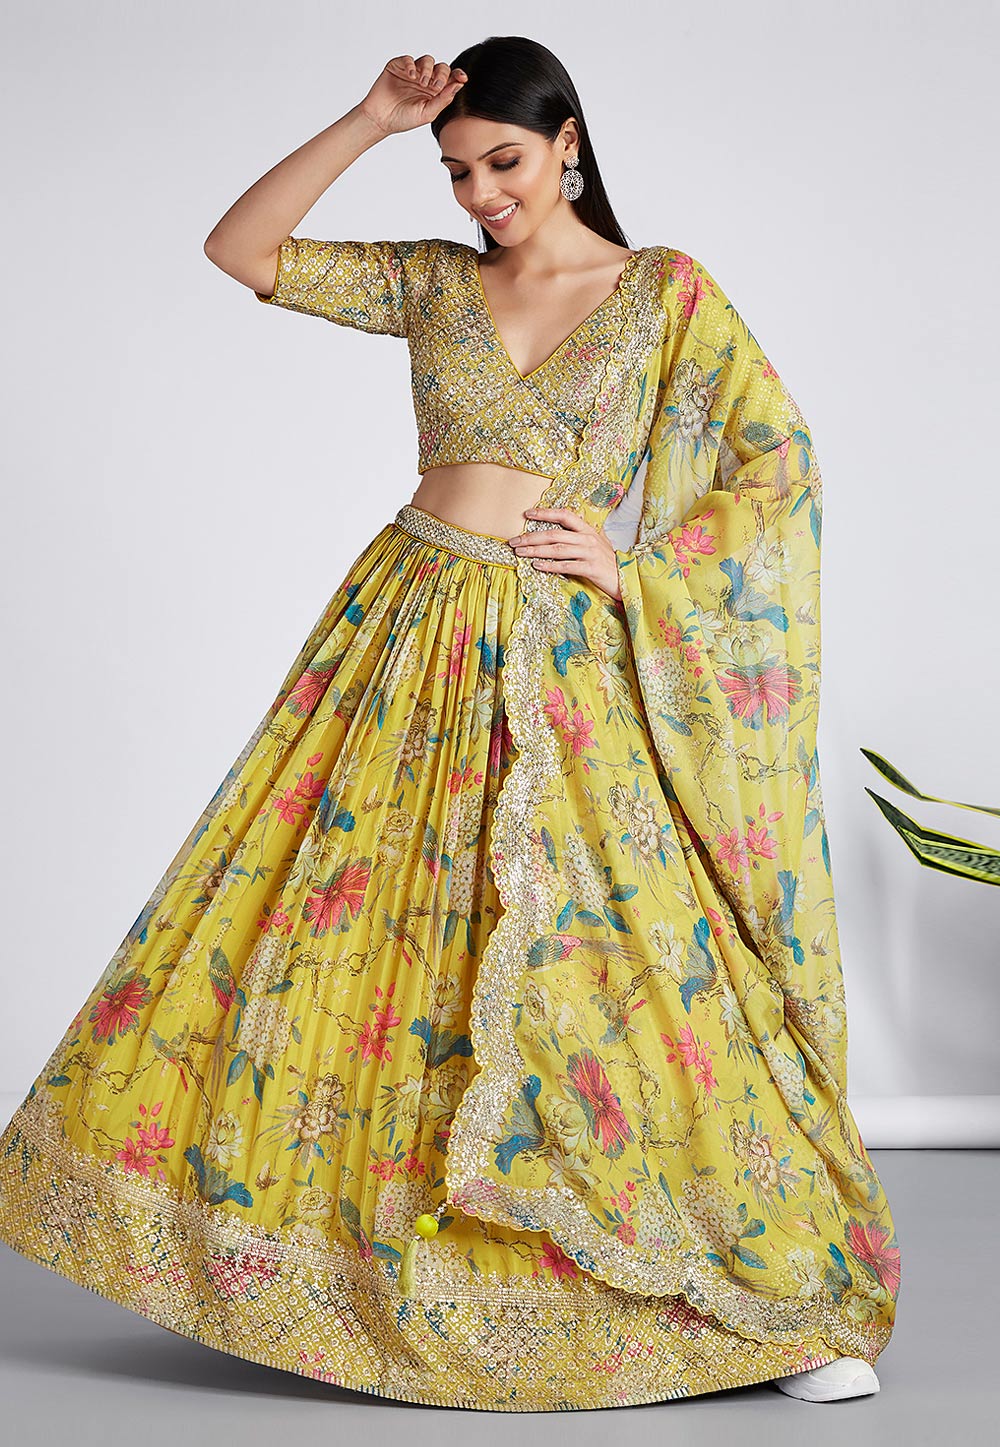 What are some tips to buy an Indian designer lehenga choli online? - Quora